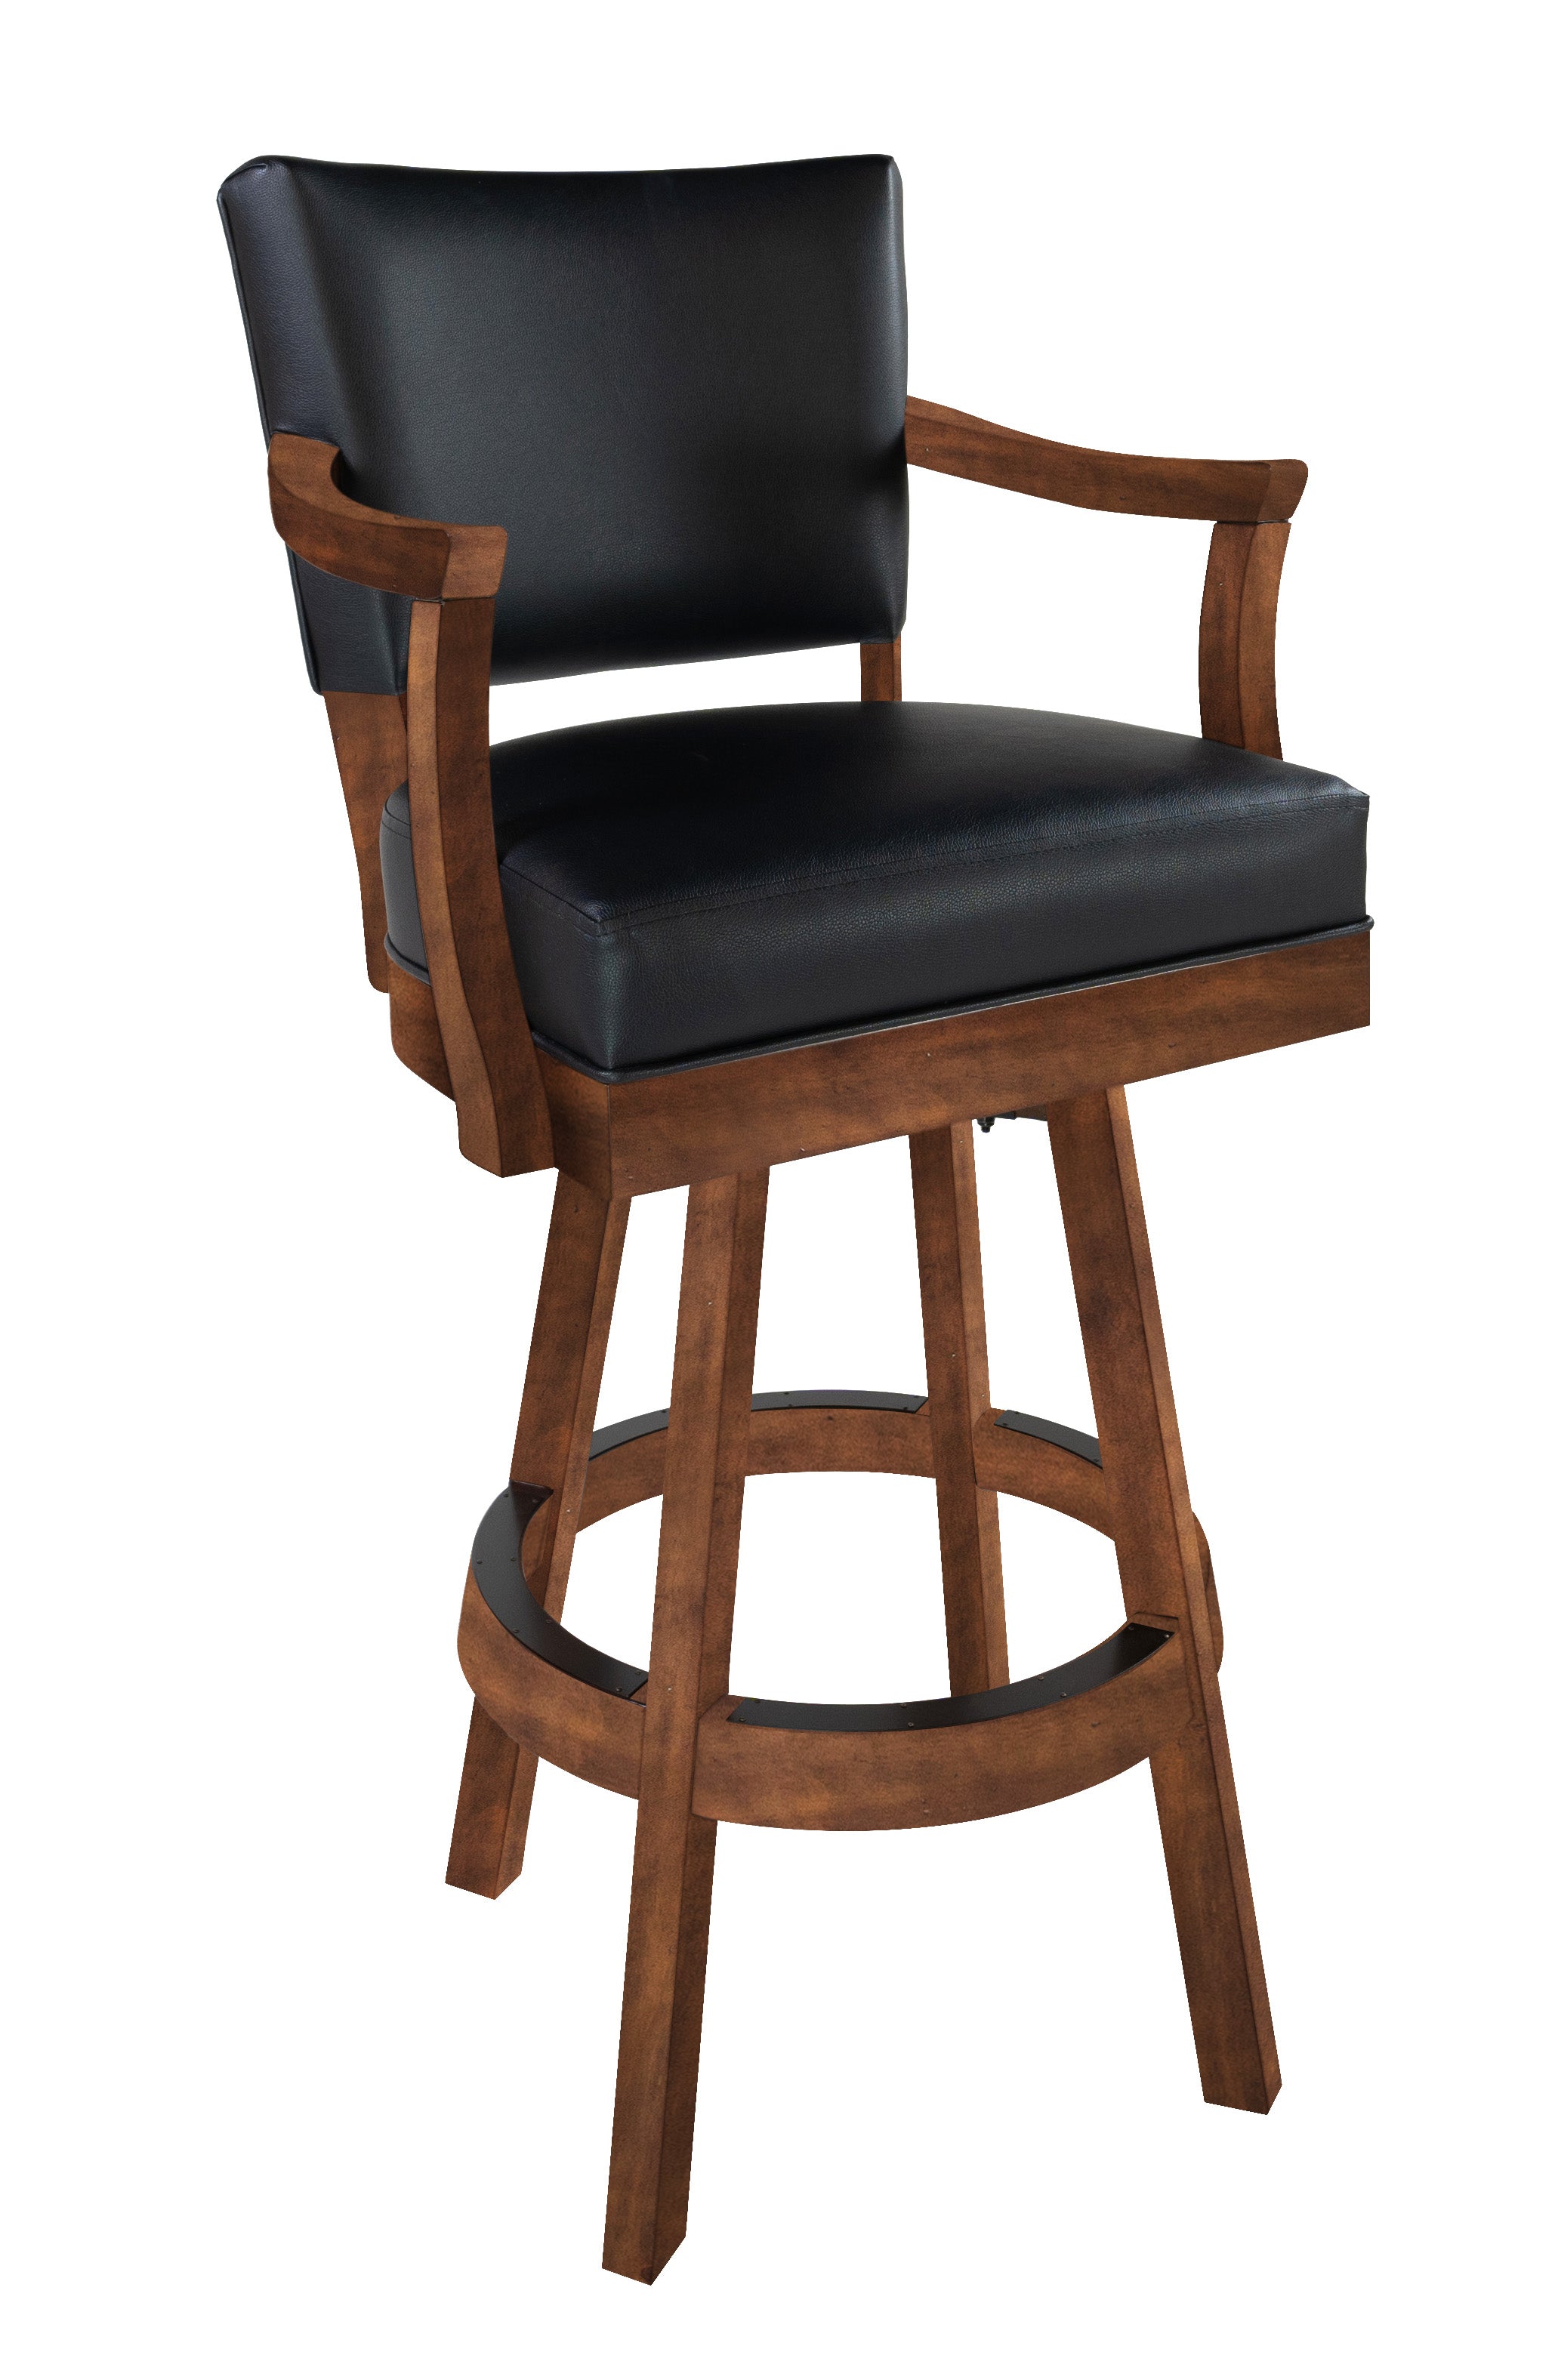 Legacy Billiards Classic Backed Barstool with Arms in Gunshot Finish